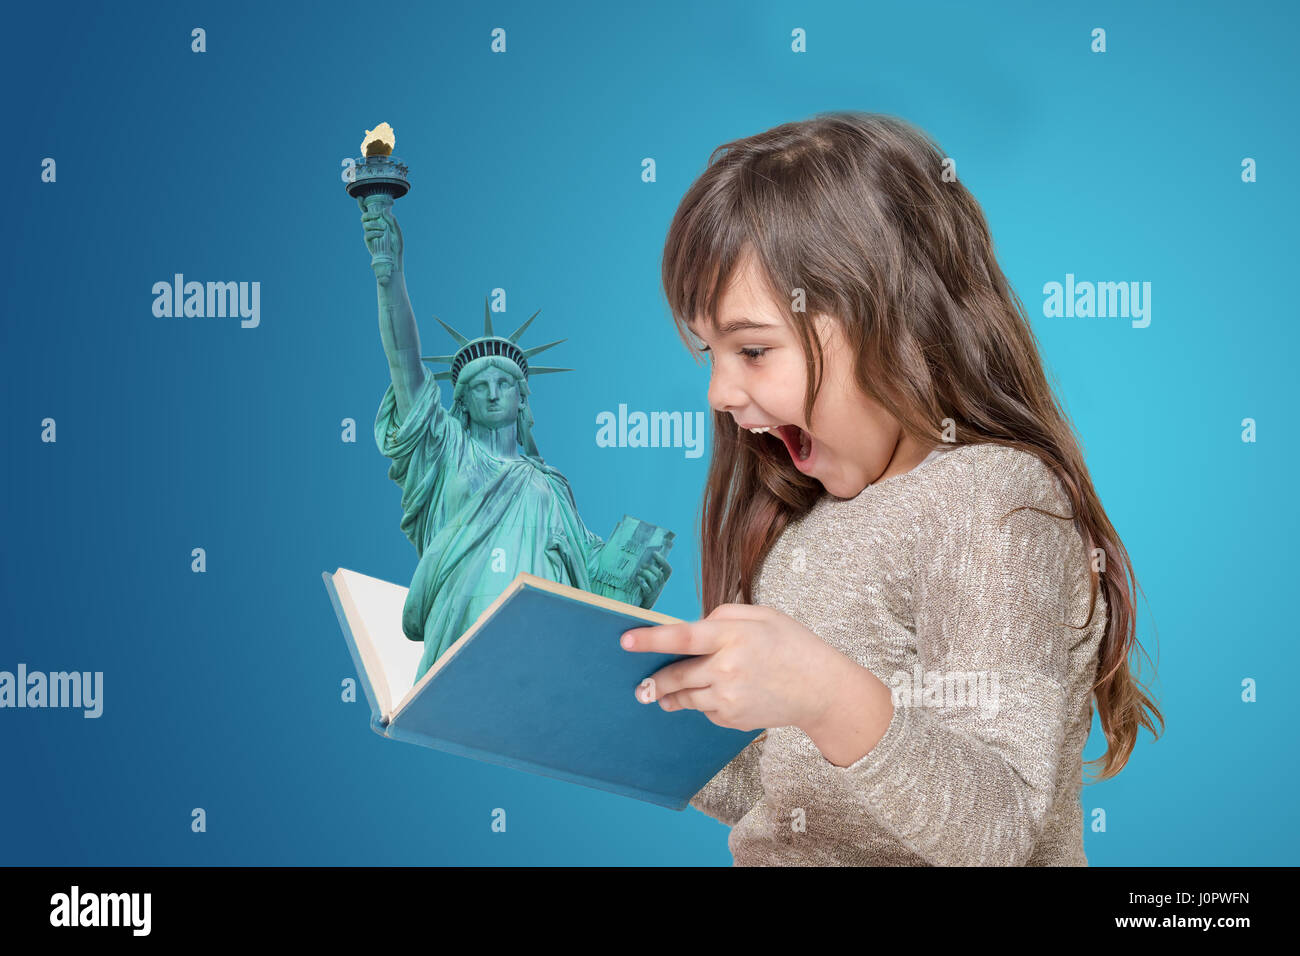 Surprised long haired little girl holding open book in her hands. From the book is protruding Statue of Liberty. All is on the blue gradient backgroun Stock Photo